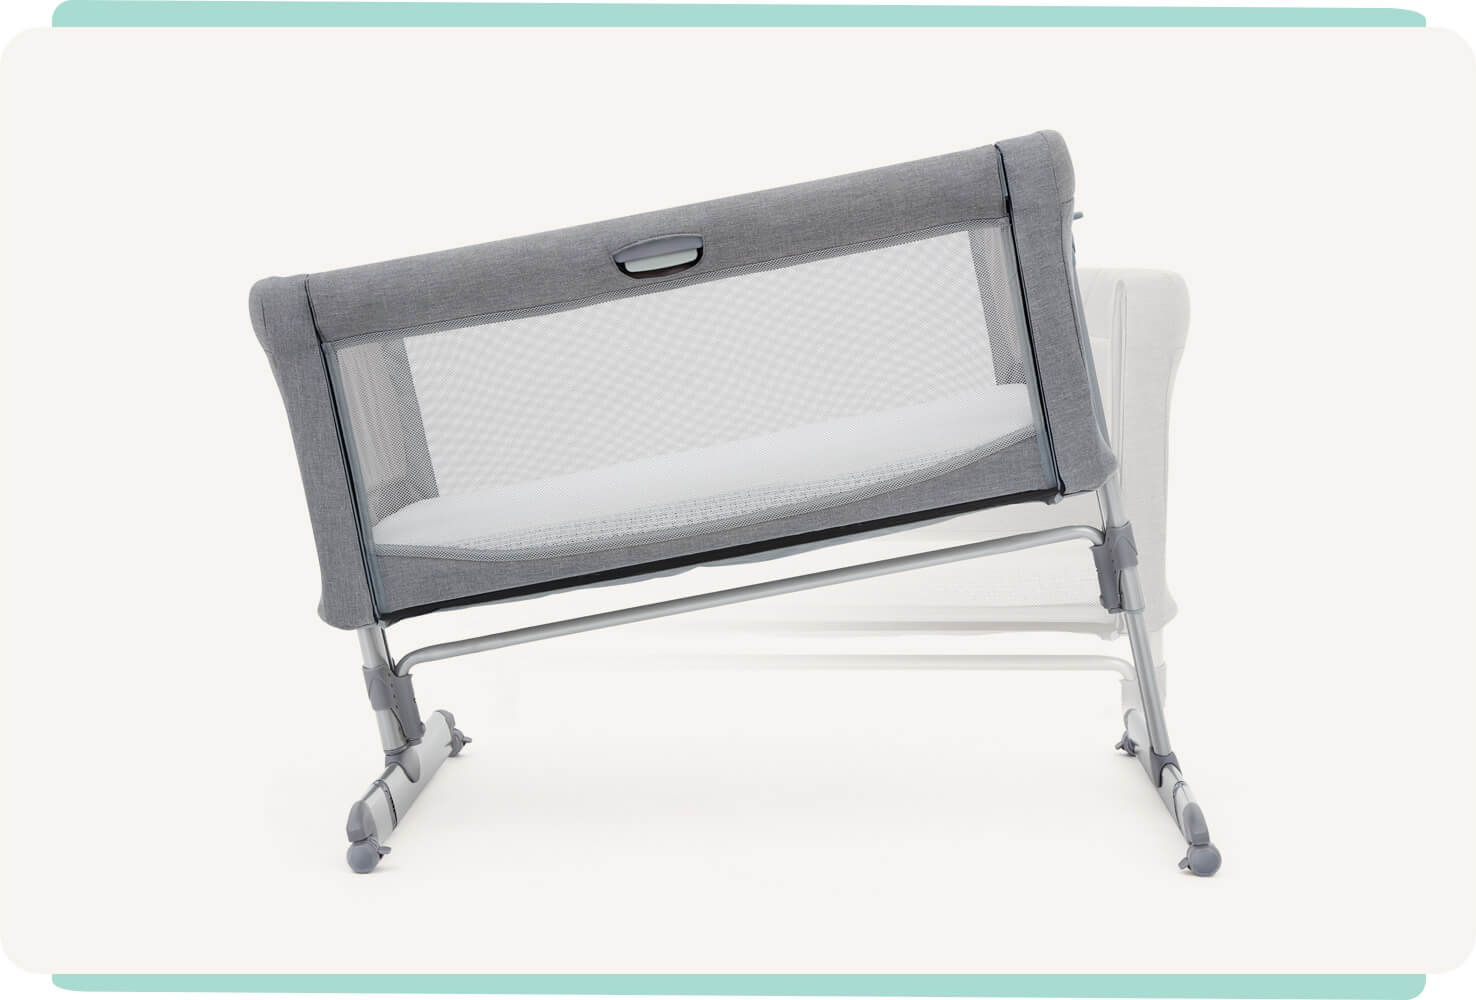   Light gray Joie roomie bedside crib tilted to show different angled positions.